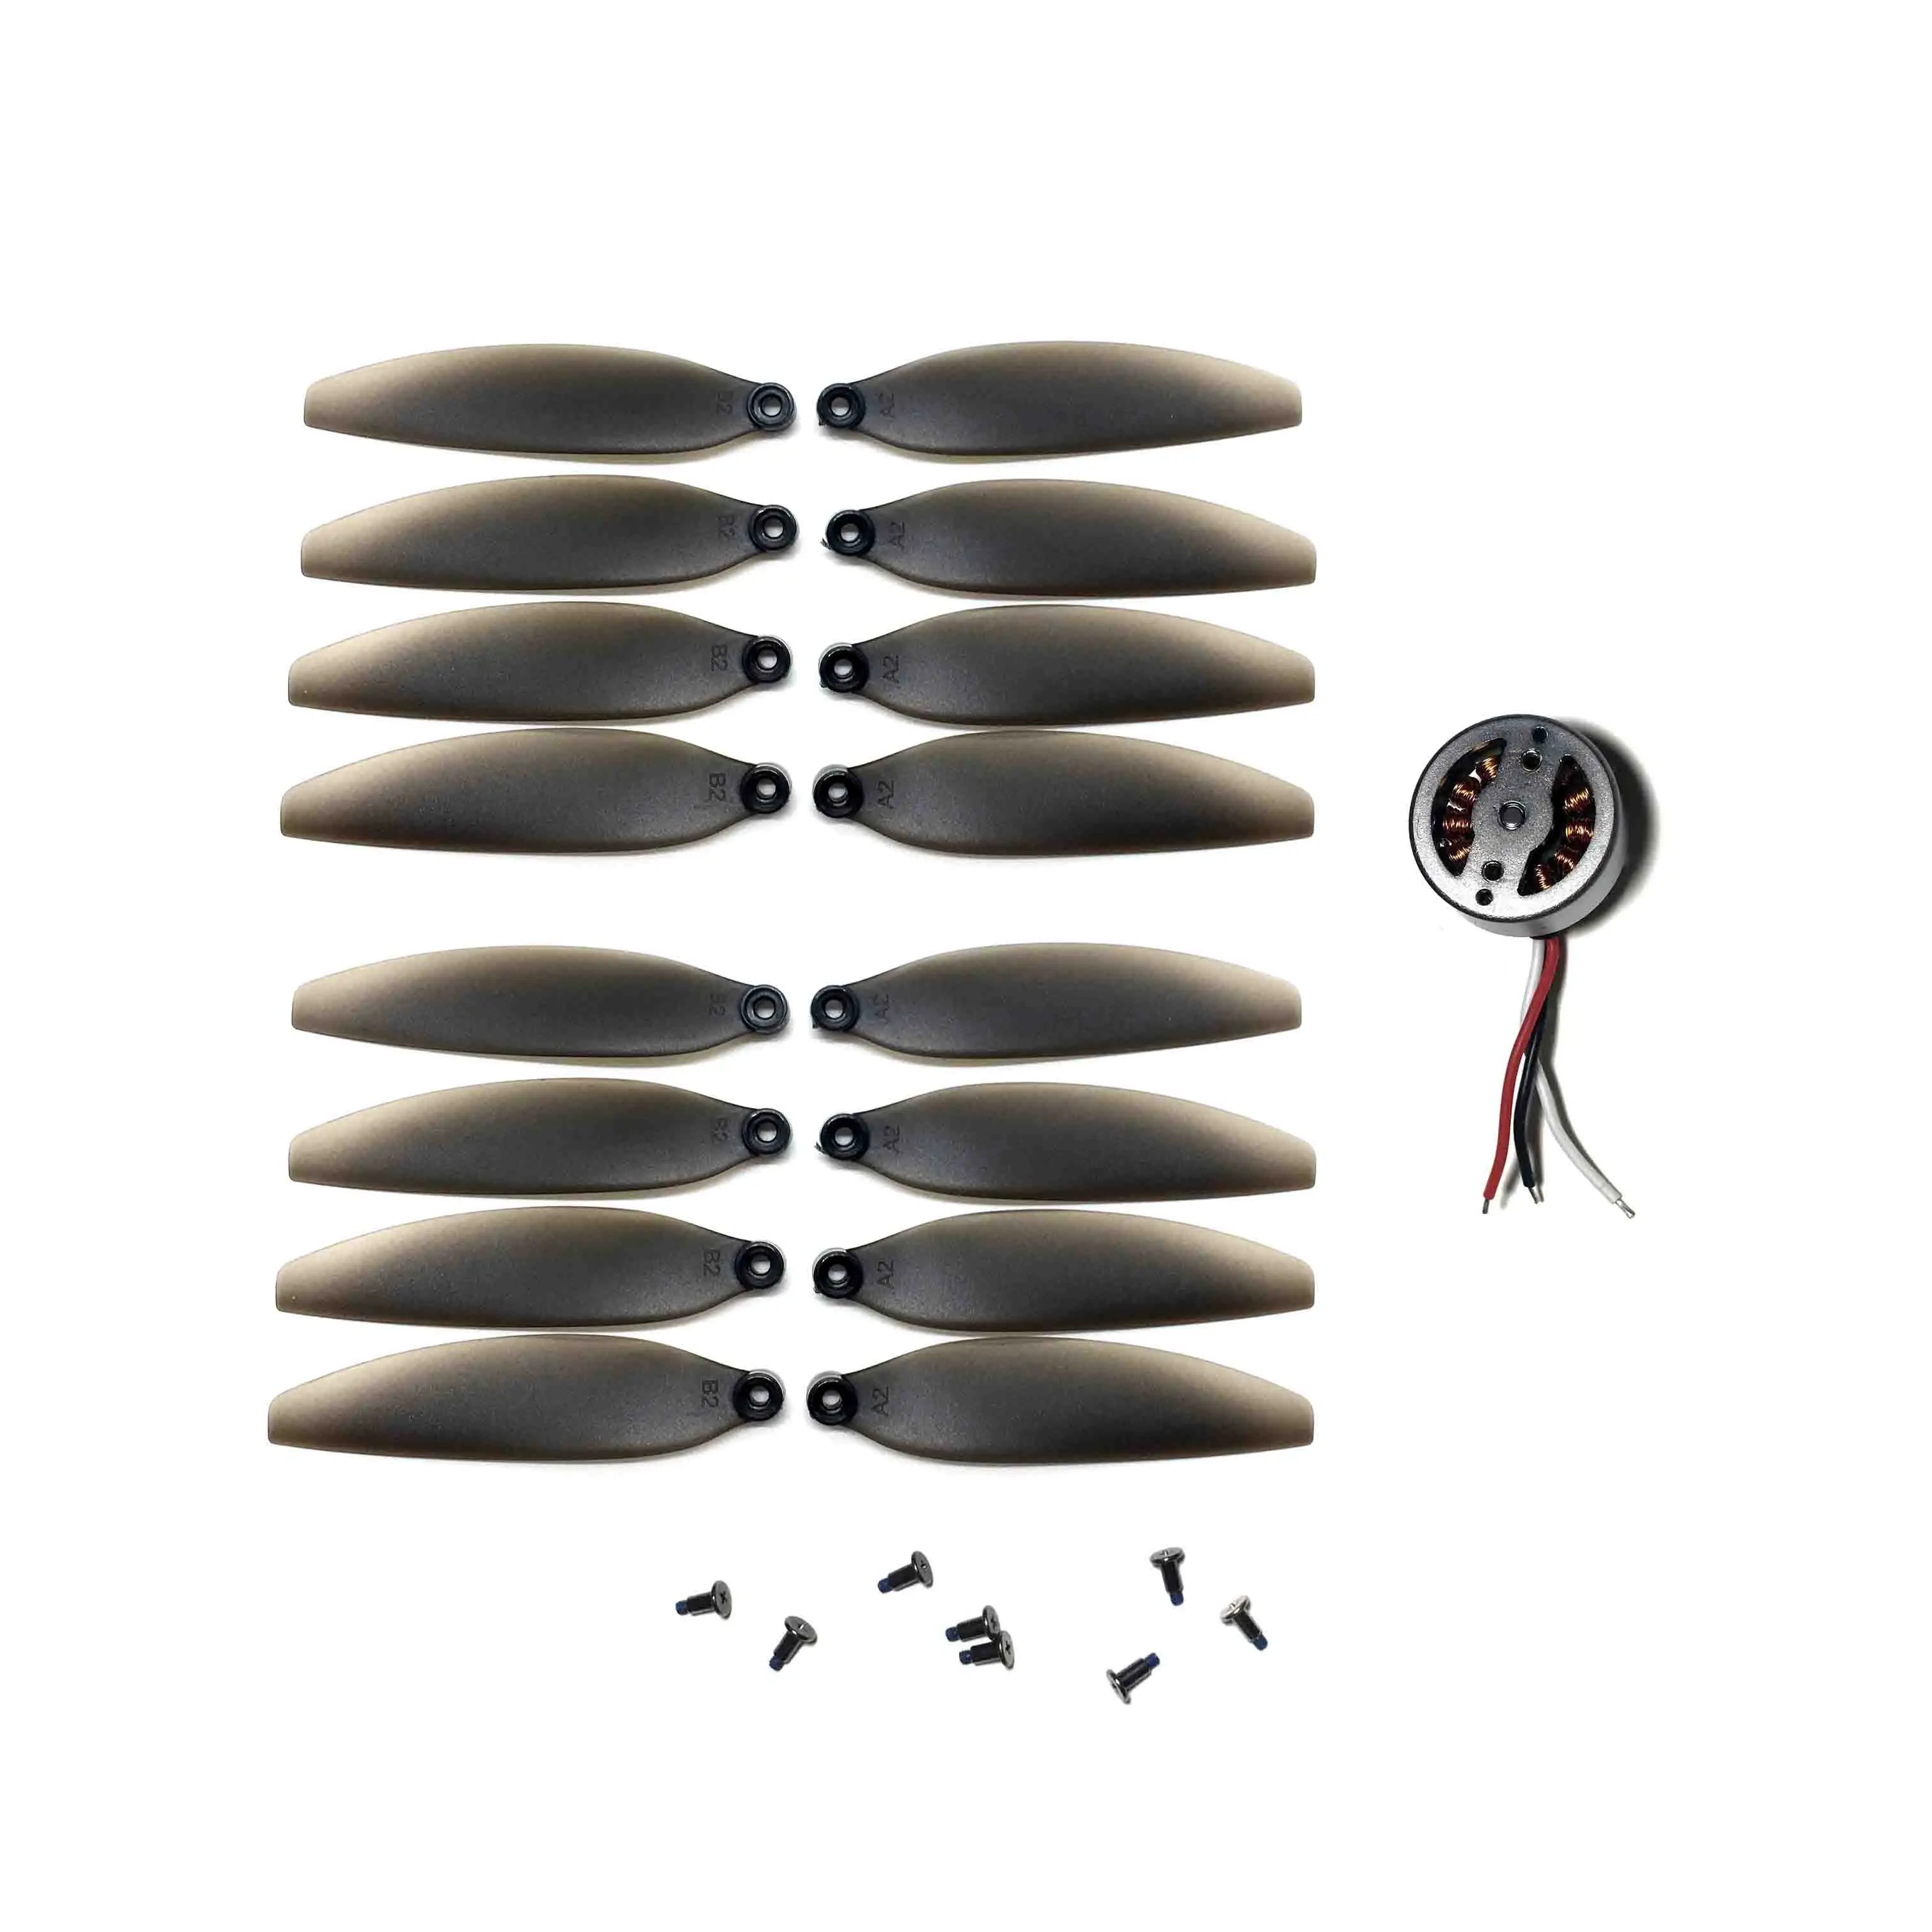 

HDRC S608 Pro GPS Drone K80 K60 RC Dron Quadcopter Spare Parts Brushless Motor Engines Propeller CW CCW Blades Accessories kit